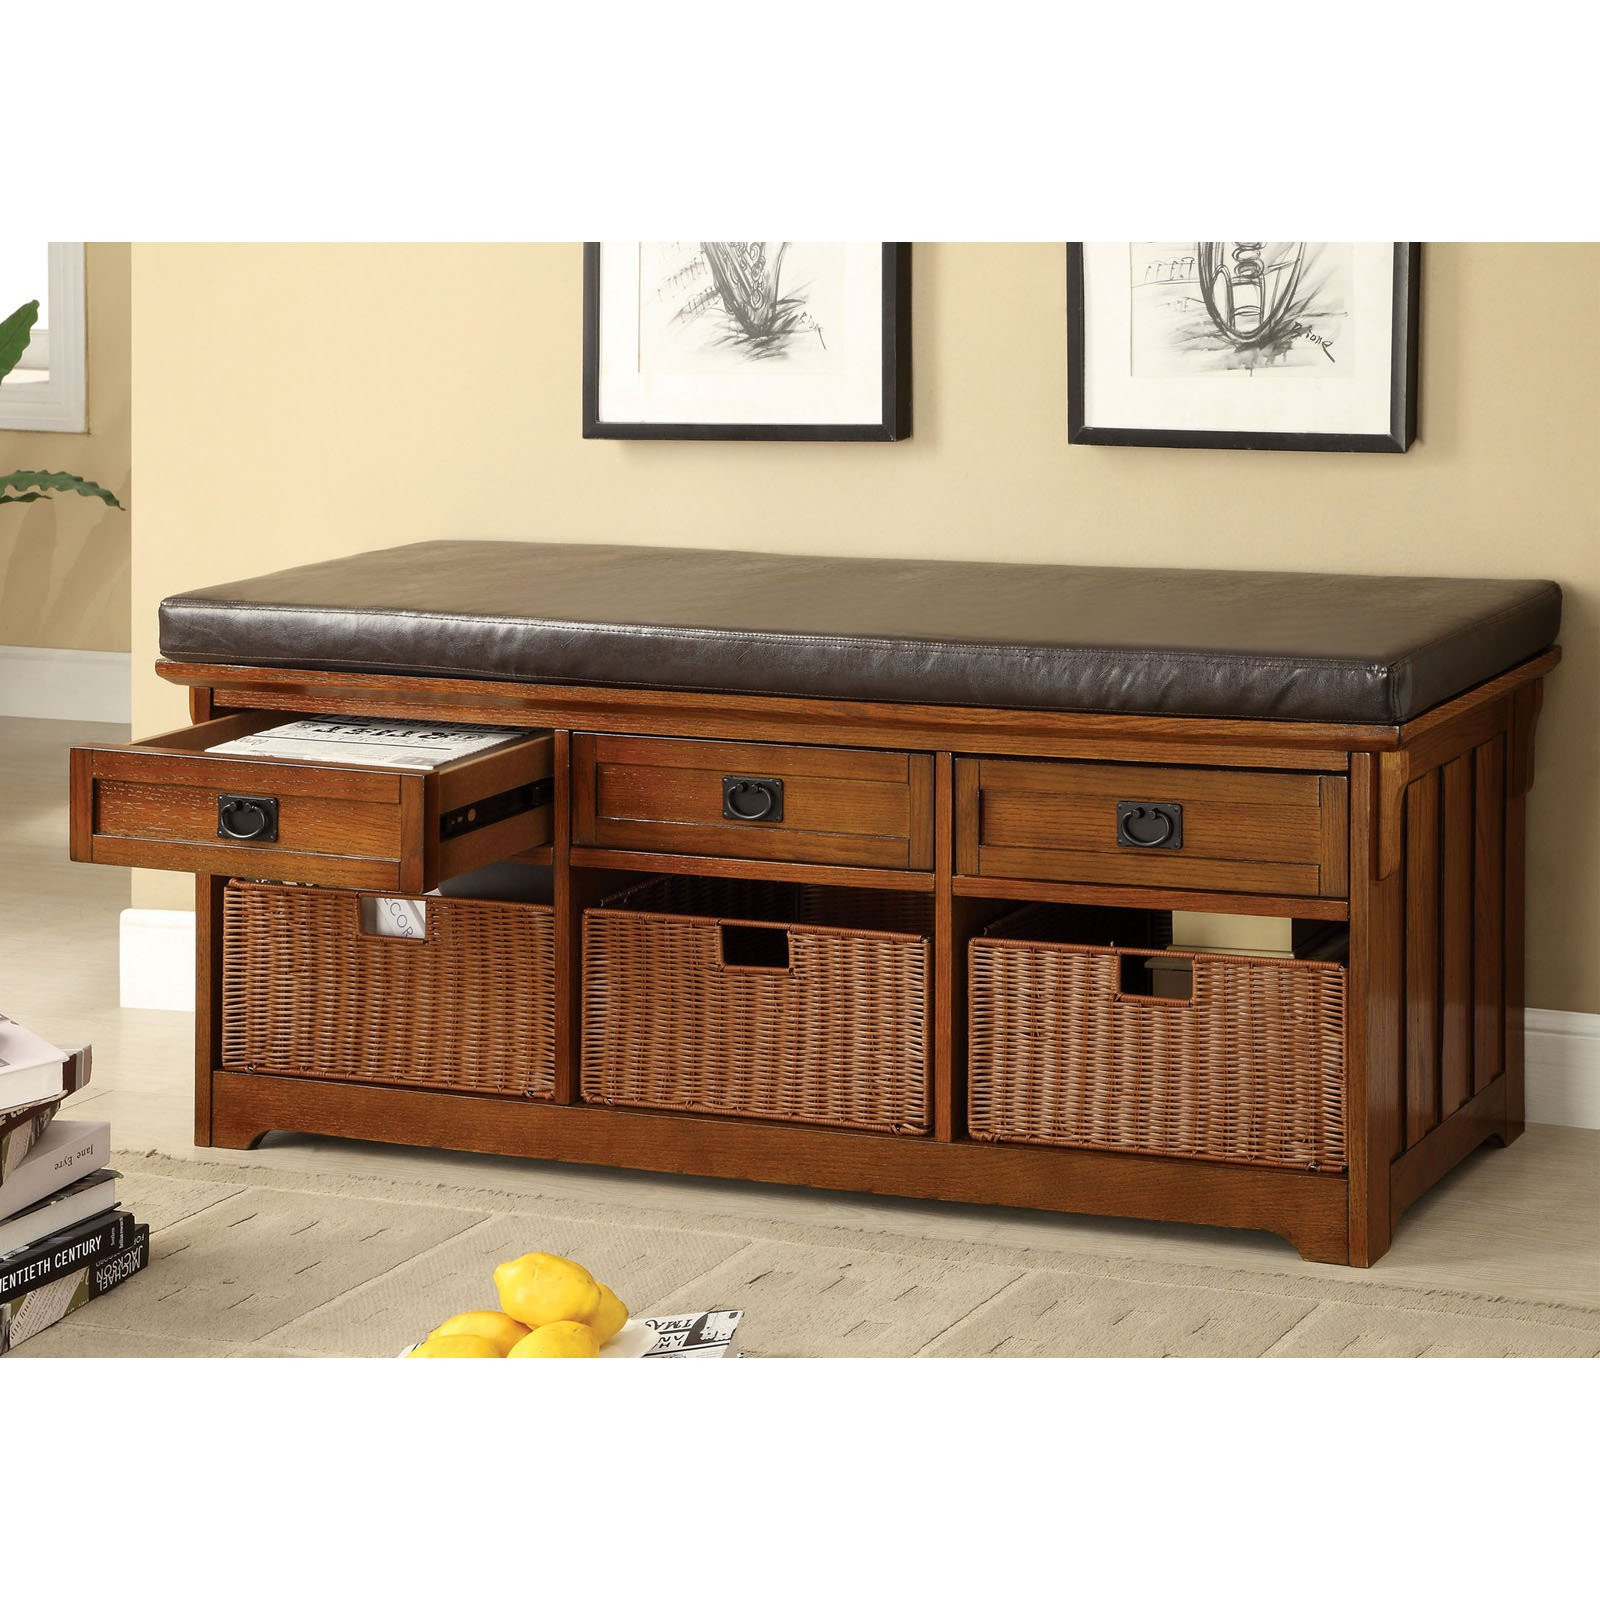 Padded Bench Seat With Storage
 Furniture of America Doreen Padded Leatherette Bench with